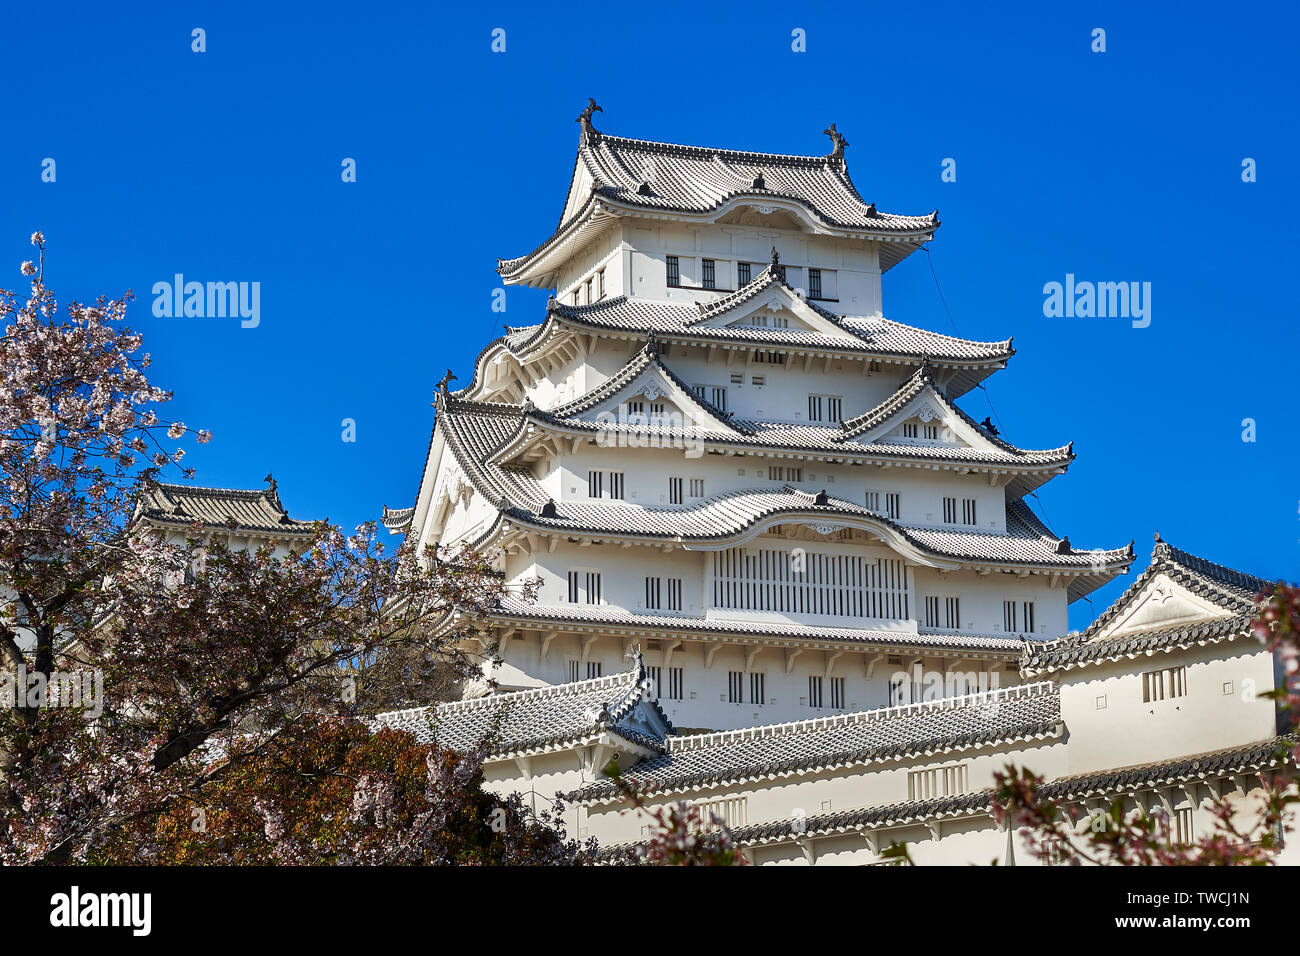 The Himeji castle in warm afternoon light with green trees at the bottom of the fortified walls. Stock Photo